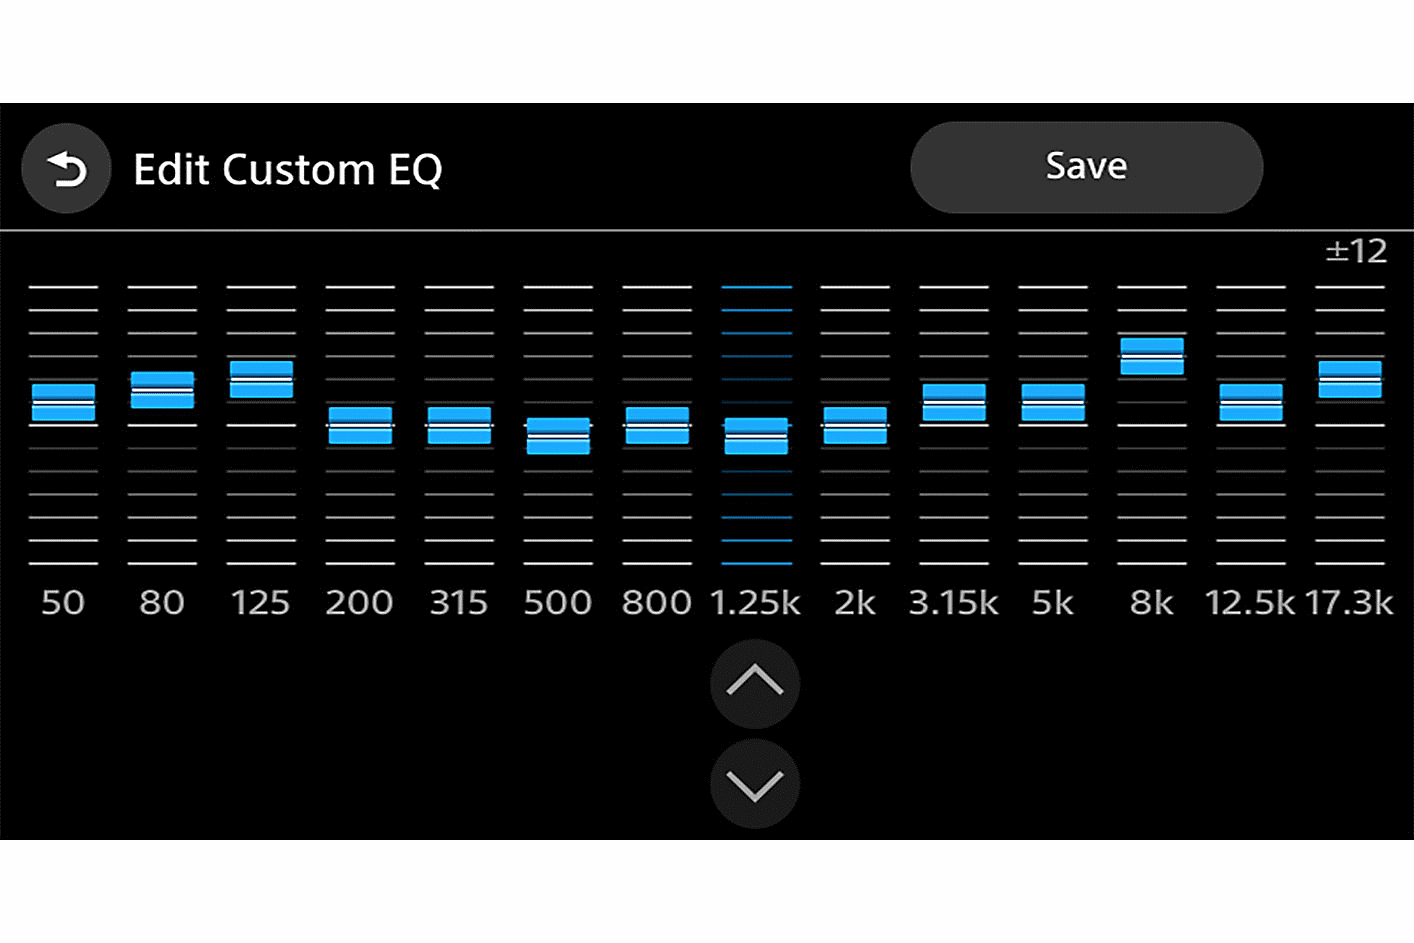 Image of the Custom EQ interface with customisable settings